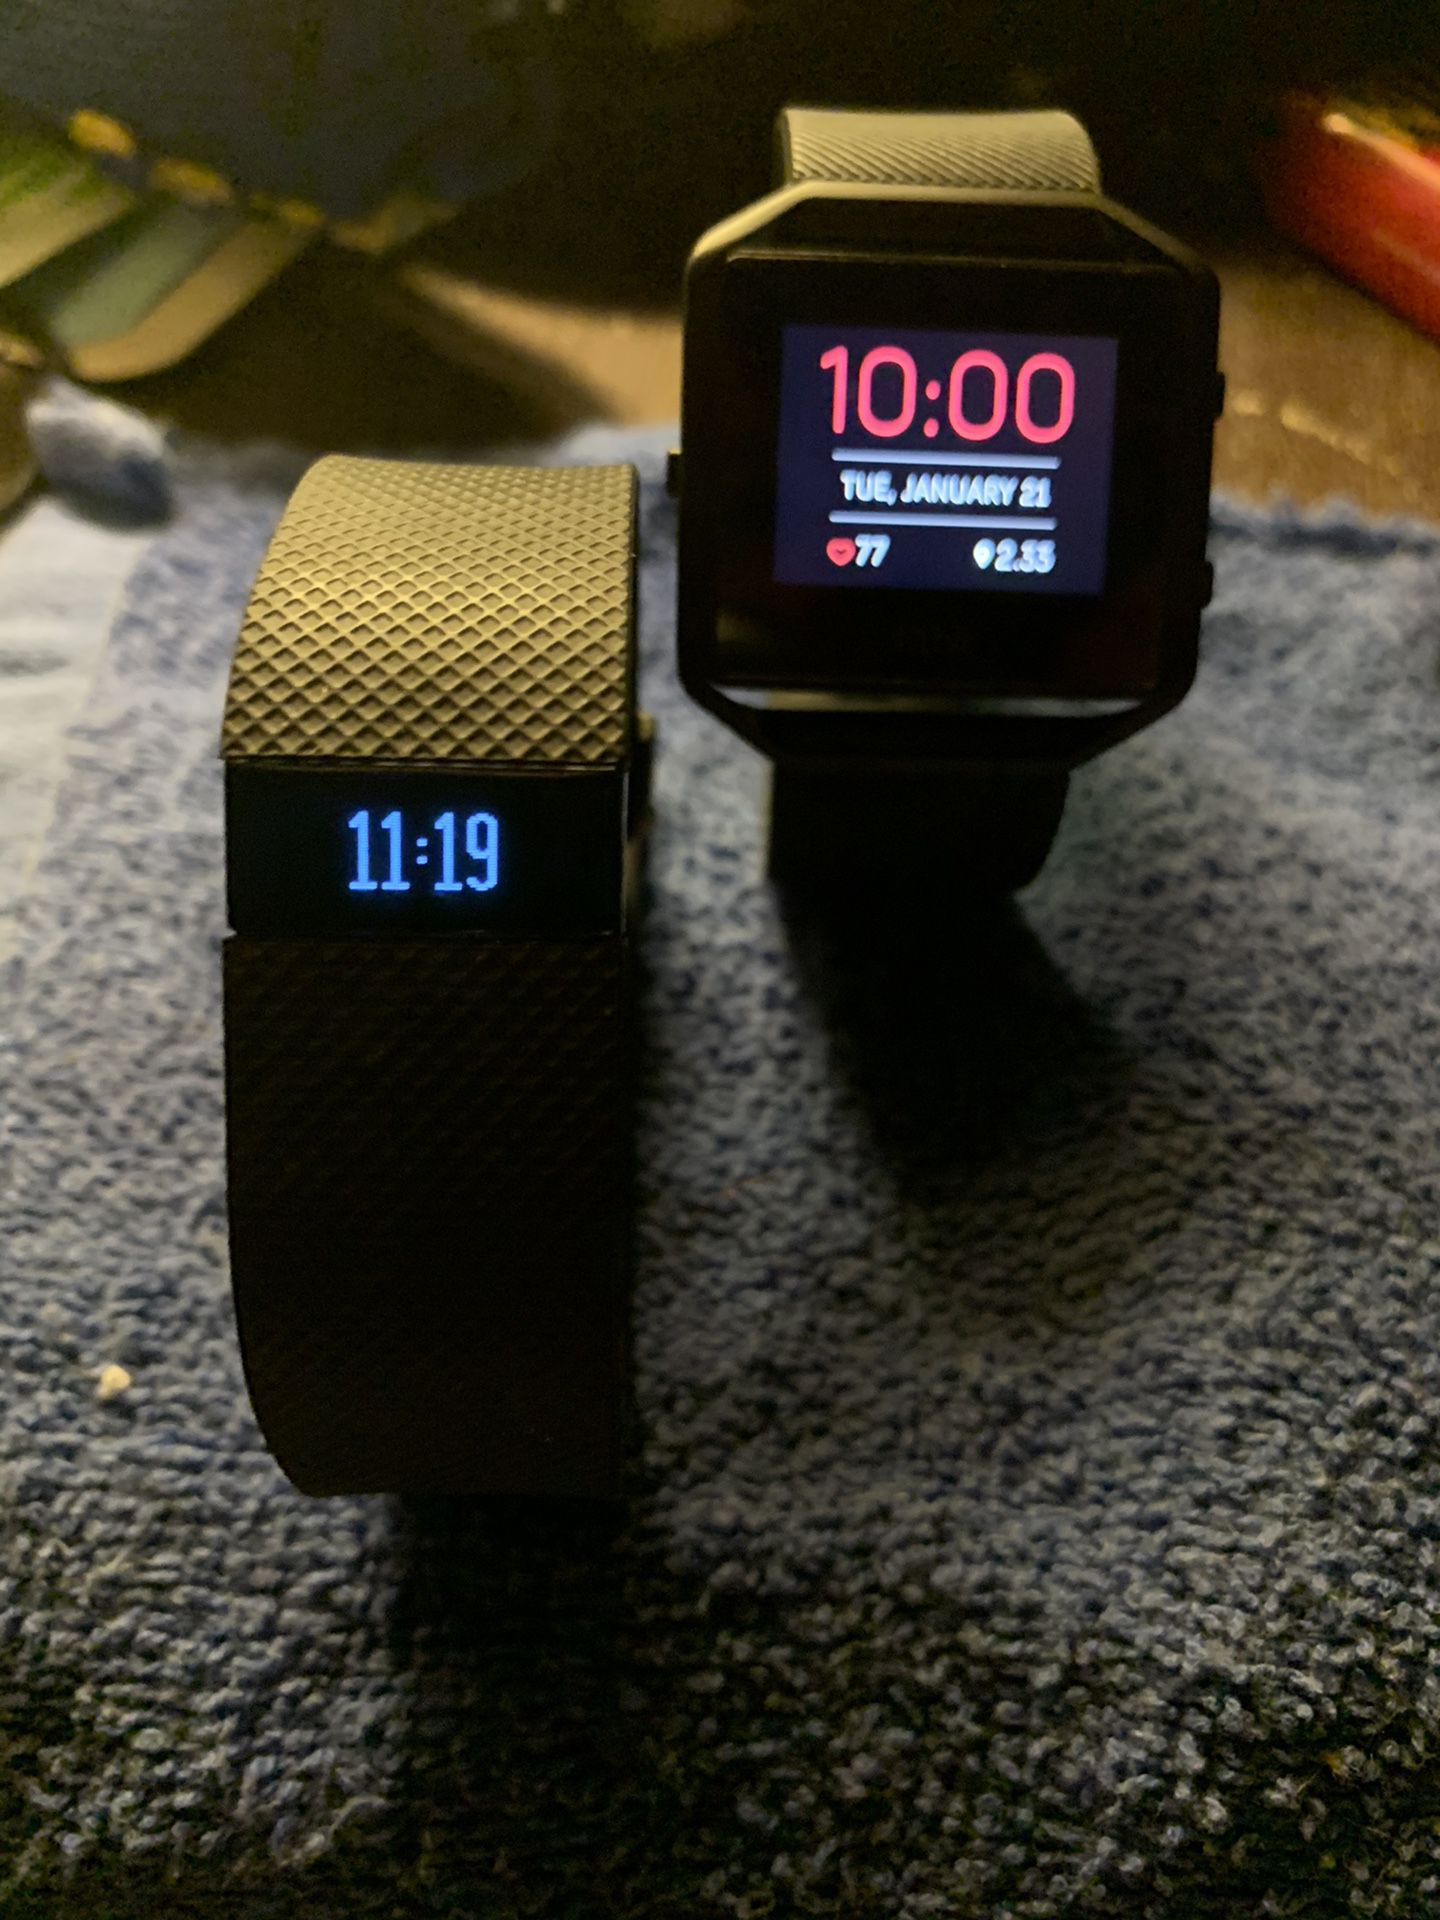 Fitbit Blaze and Fitbit Charge HR both for $45.00